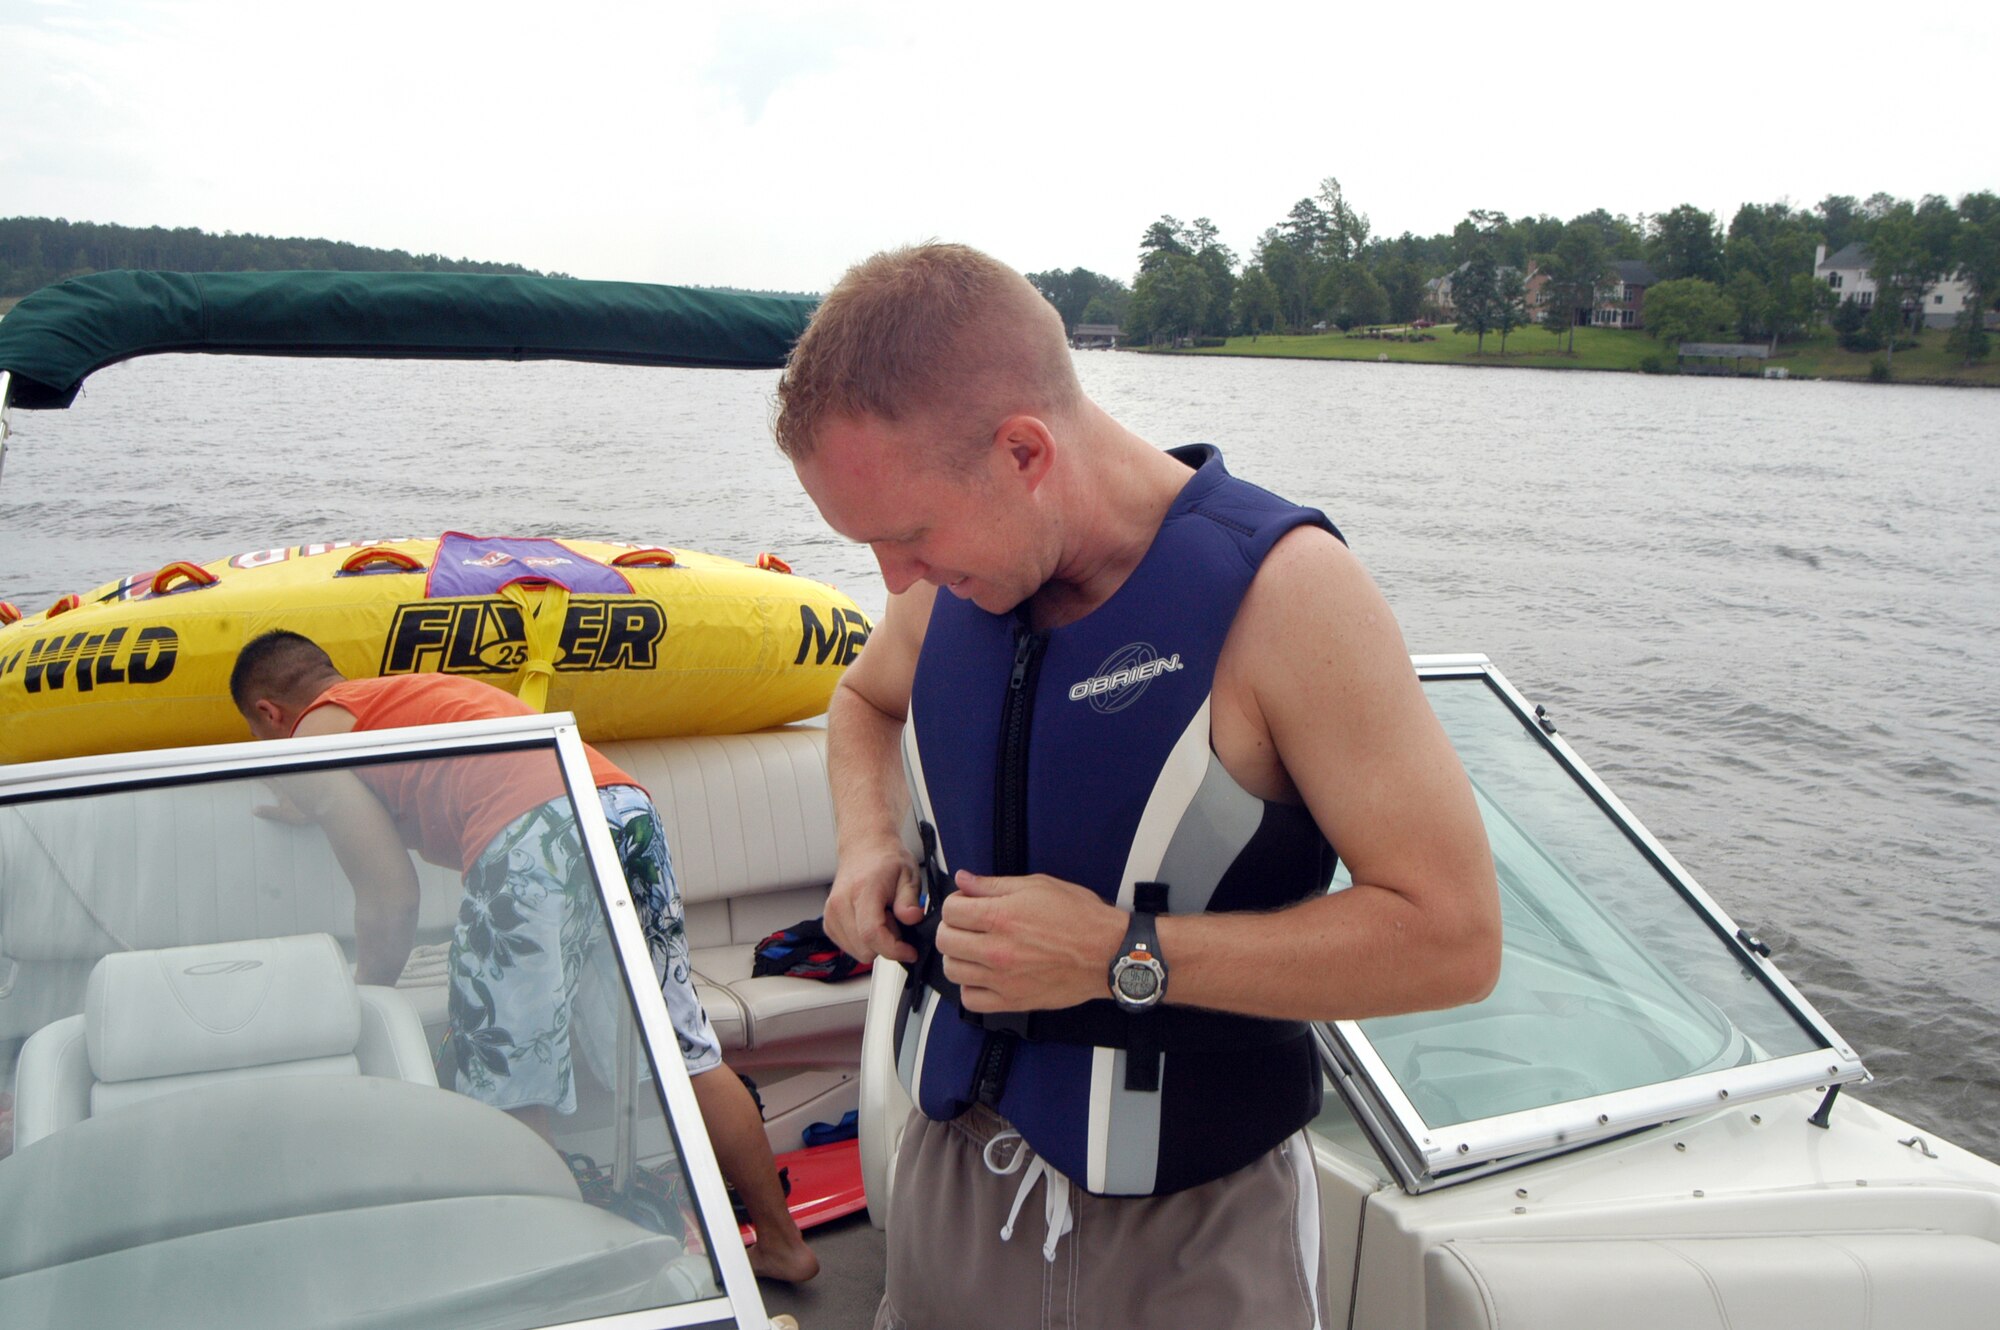 1st. Lt. Jason Knab fastens on a life vest before boating on Lake Tobesofkee. U. S. Air Force photo by Sue Sapp 